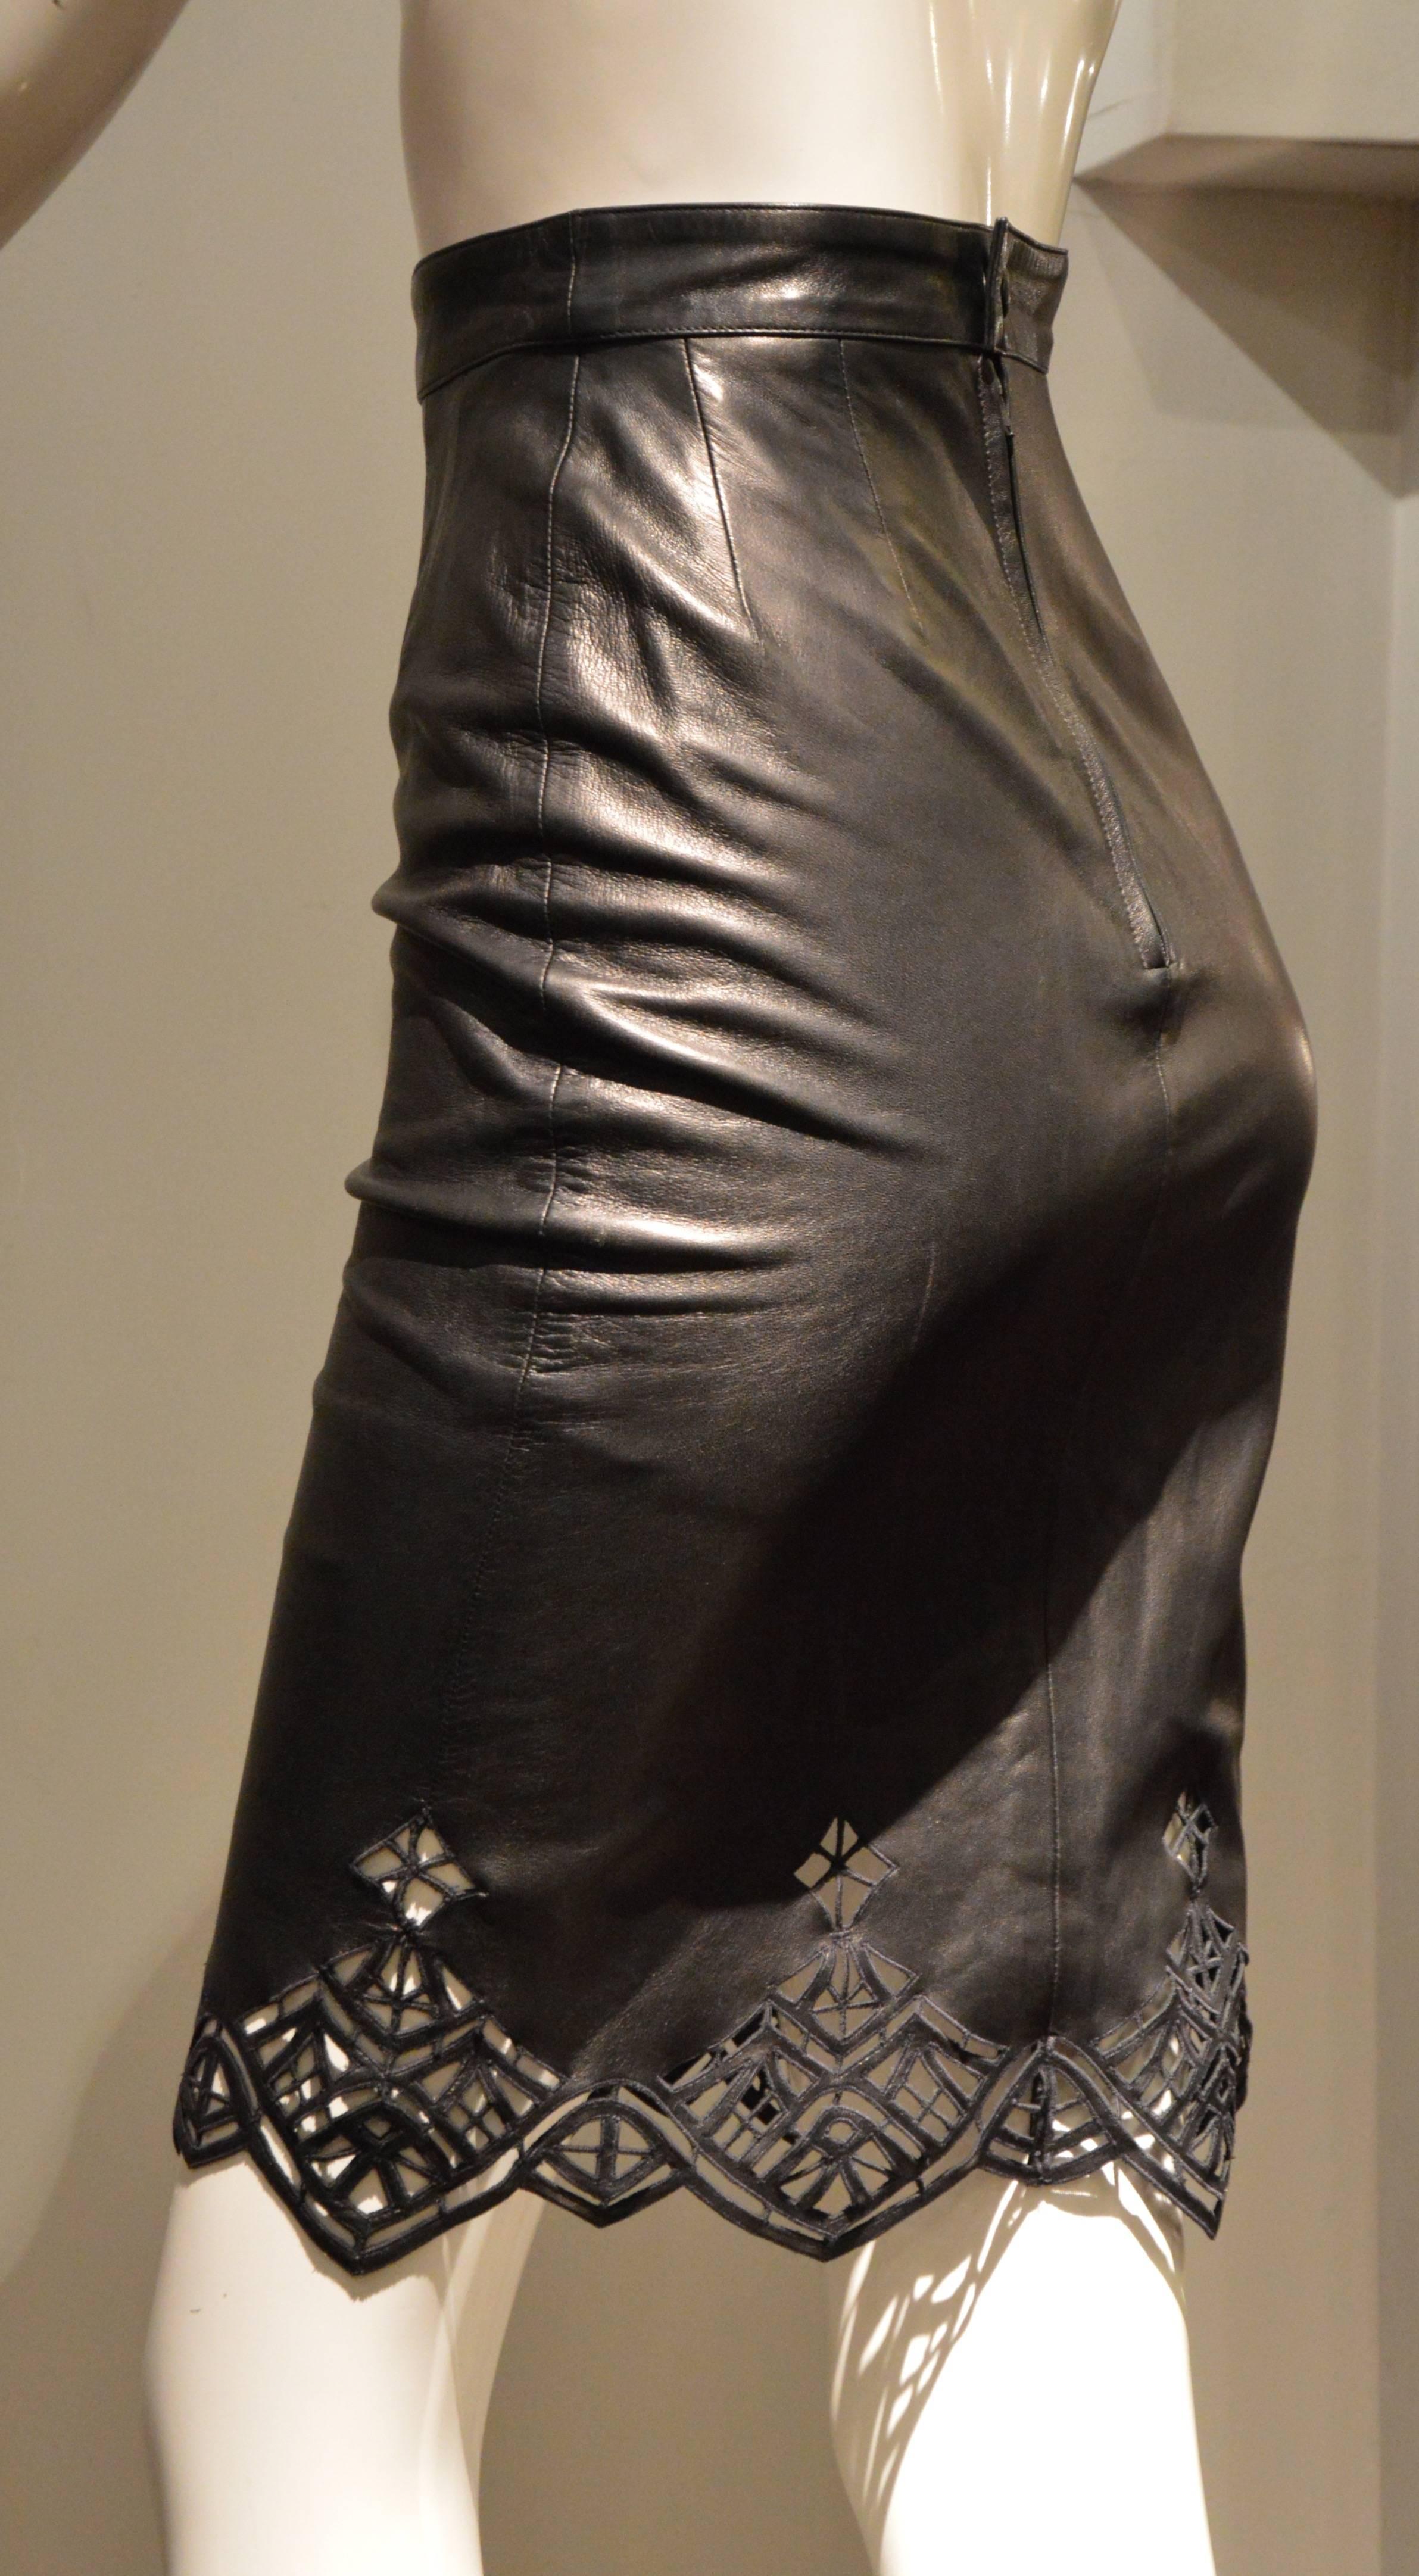 Striking Nina Ricci Leather Pencil Skirt In Excellent Condition For Sale In Paris, IDF